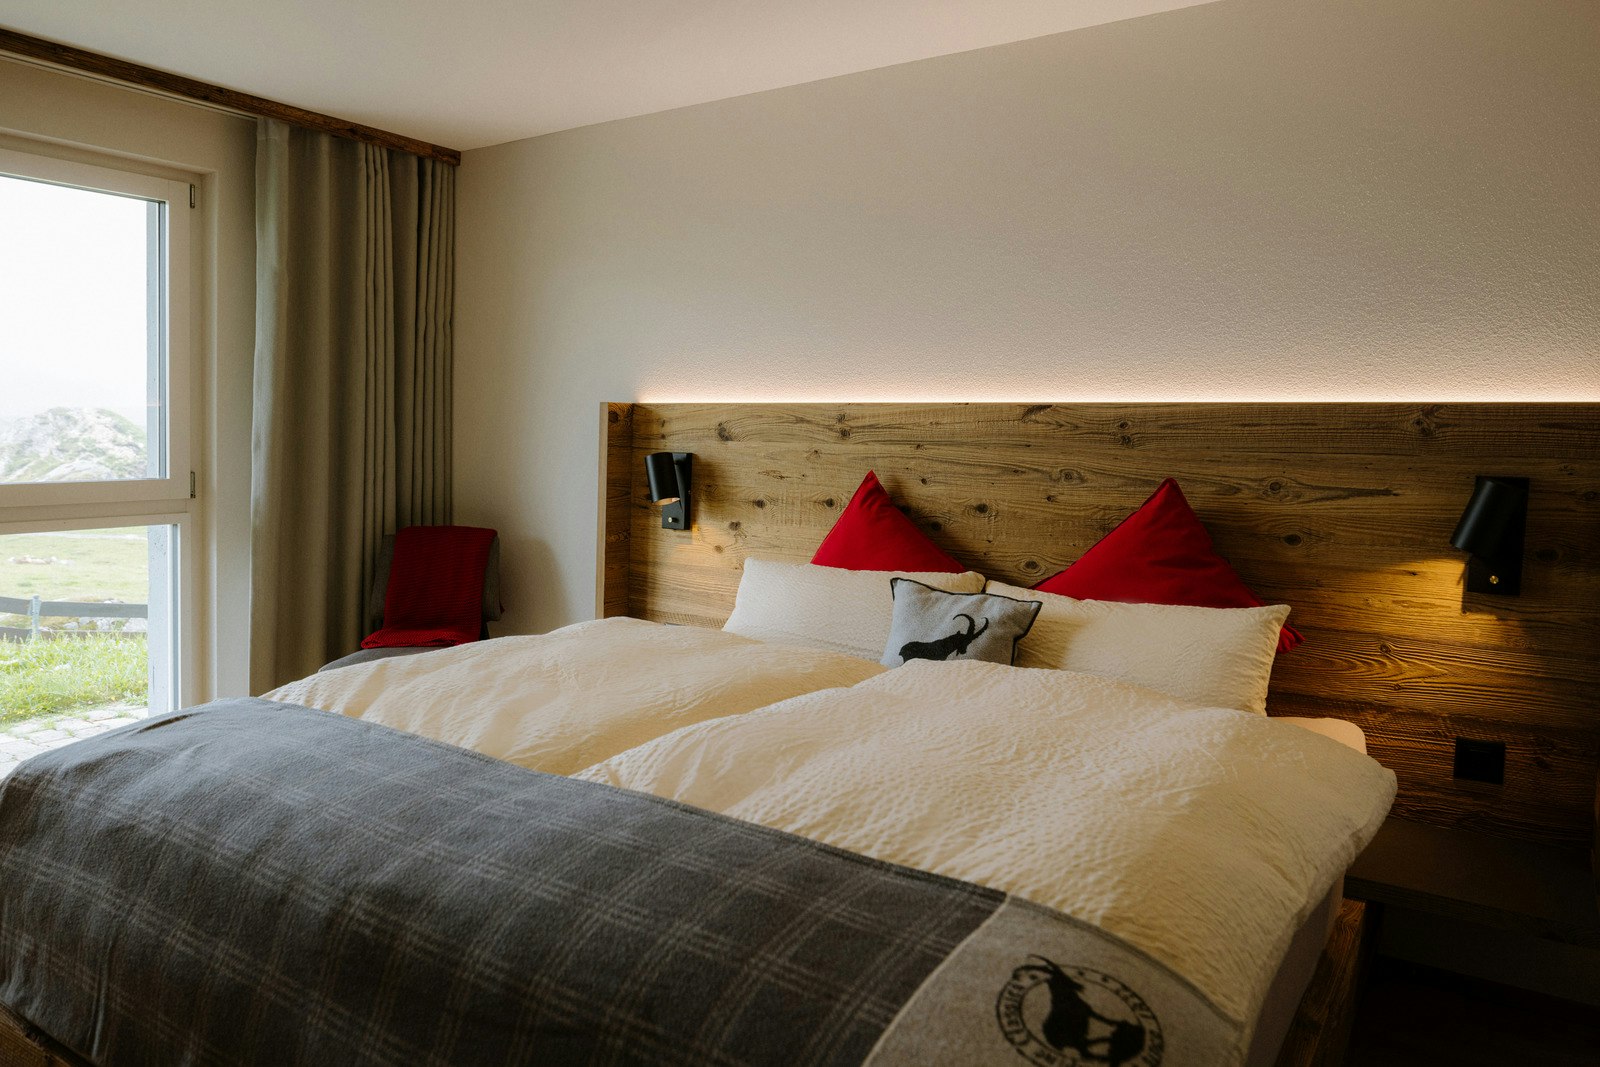 Overnight stay in the Wildstrubel comfort room with 3-course dinner